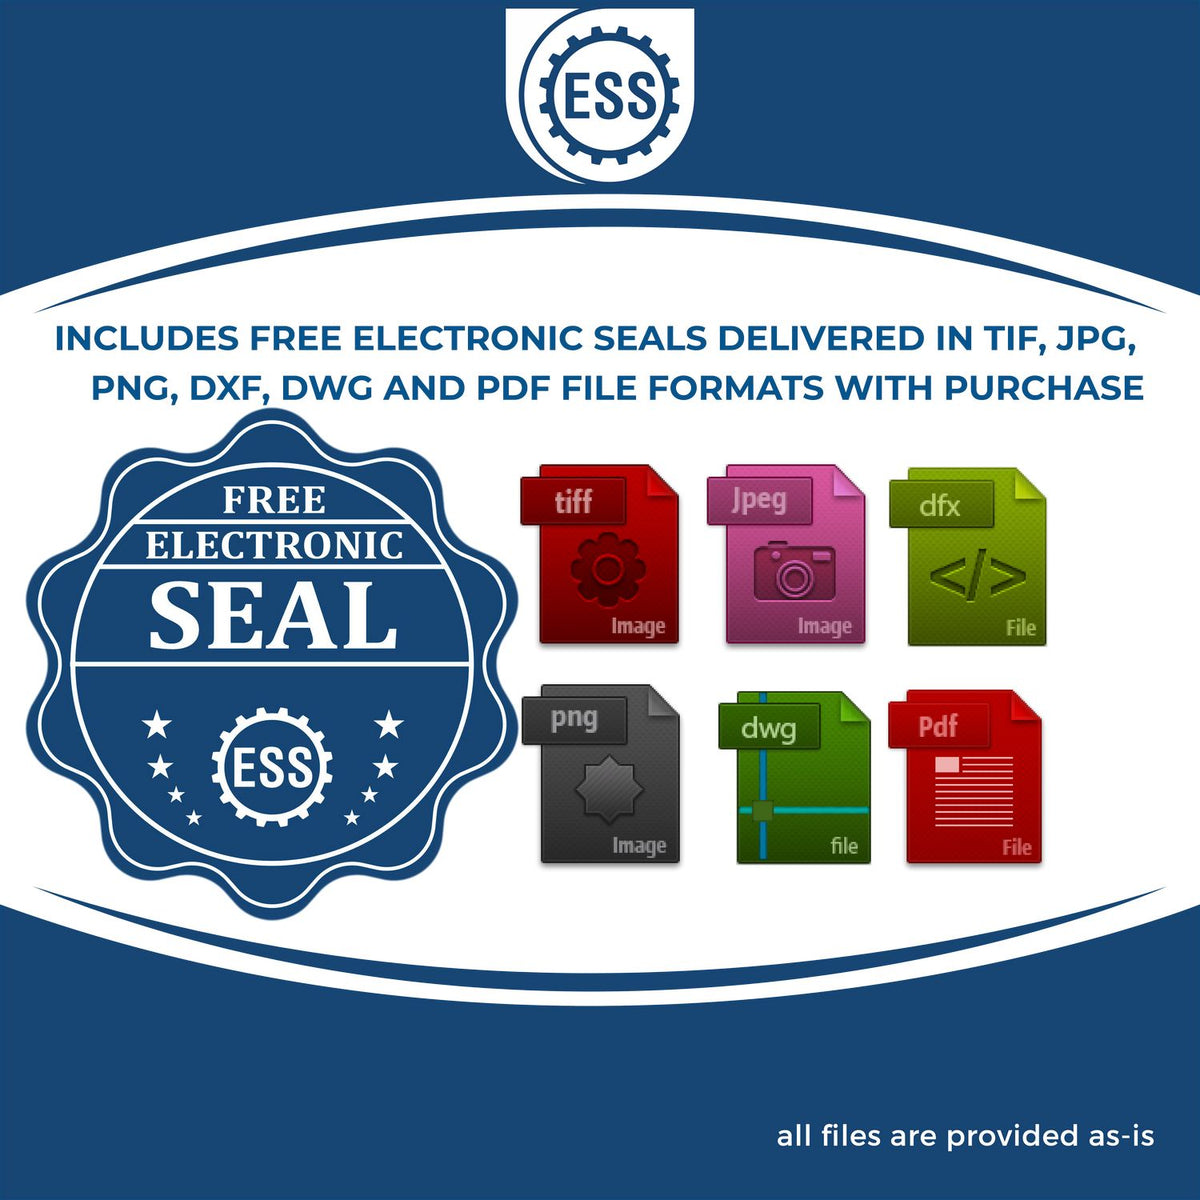 An infographic for the free electronic seal for the Long Reach Arizona Land Surveyor Seal illustrating the different file type icons such as DXF, DWG, TIF, JPG and PNG.